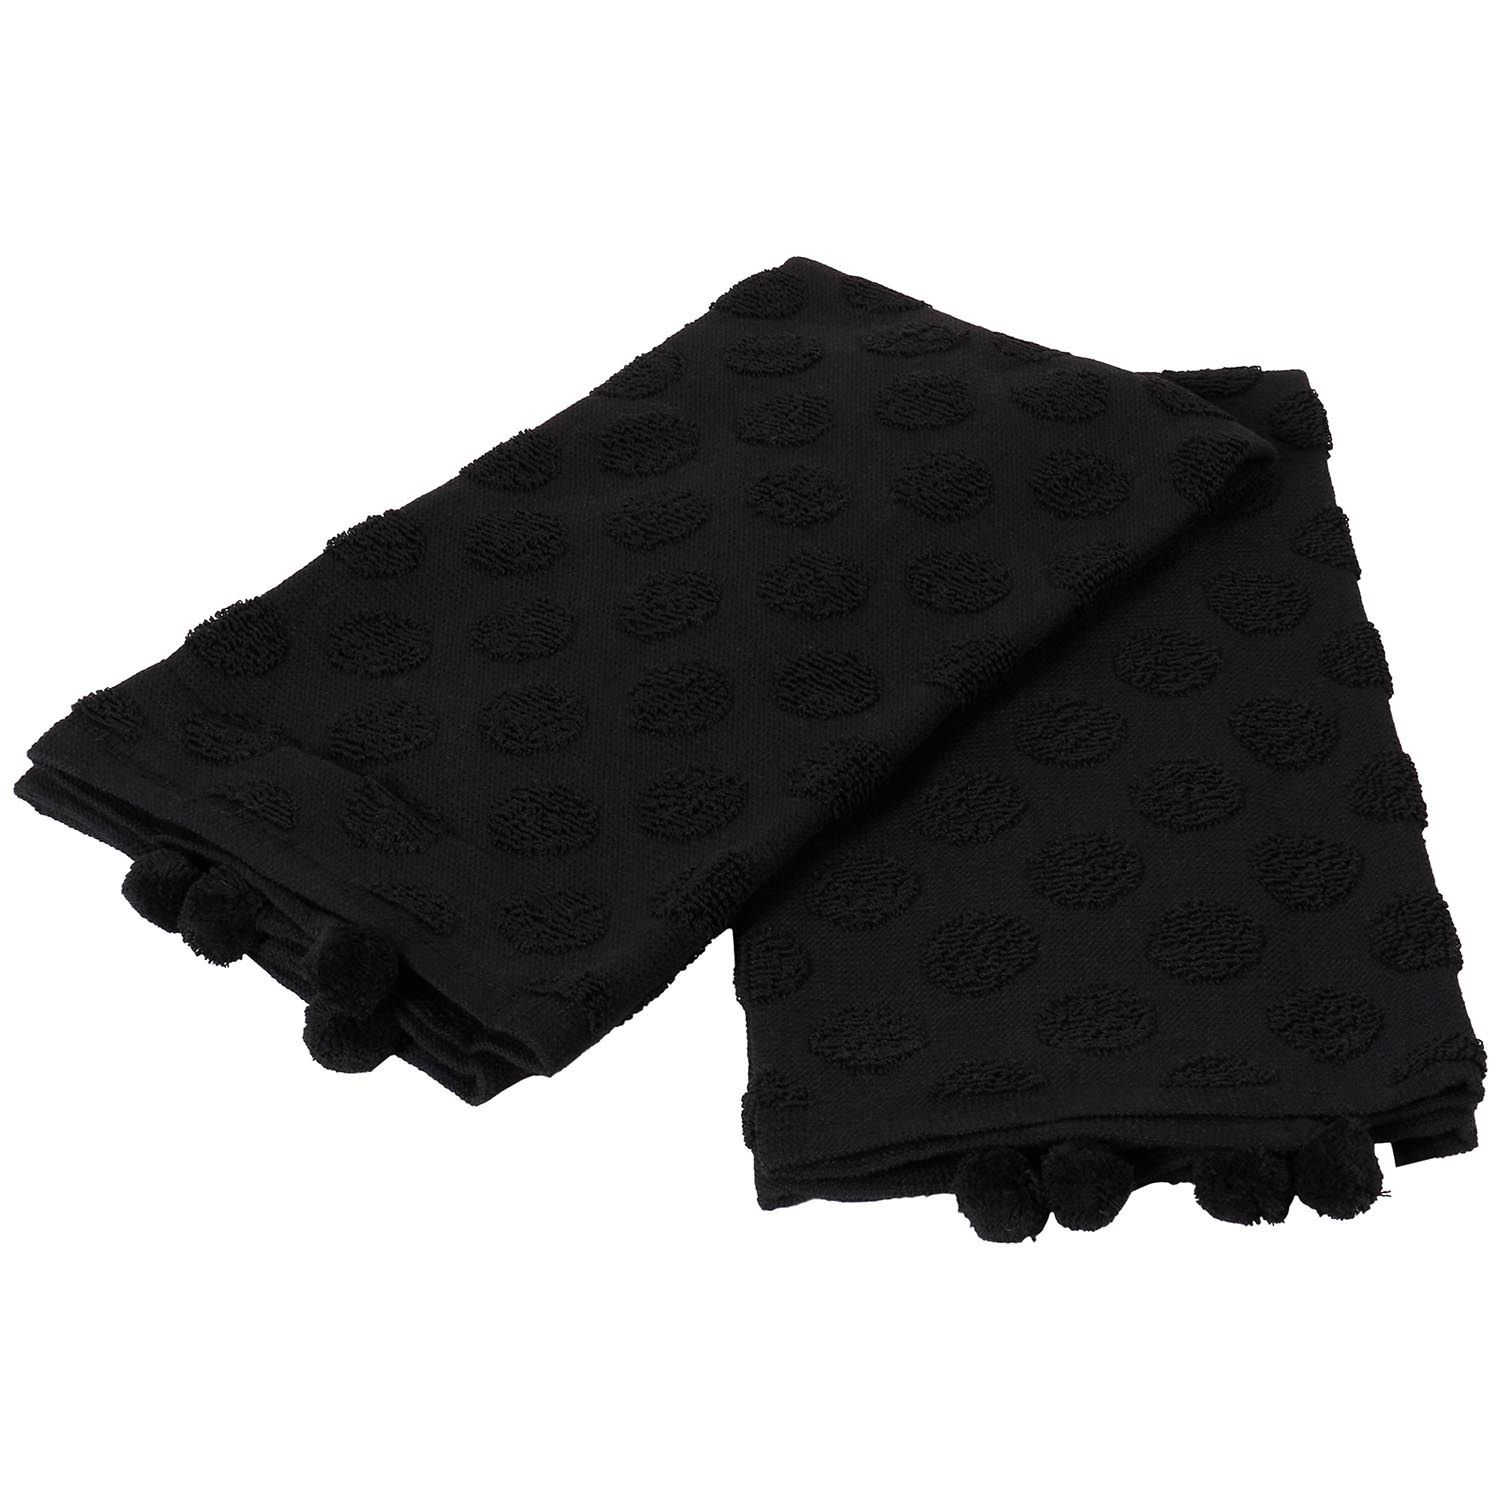 Pack of 2 Dobby Terry Kitchen Towels with Pom Poms - Black Image 9